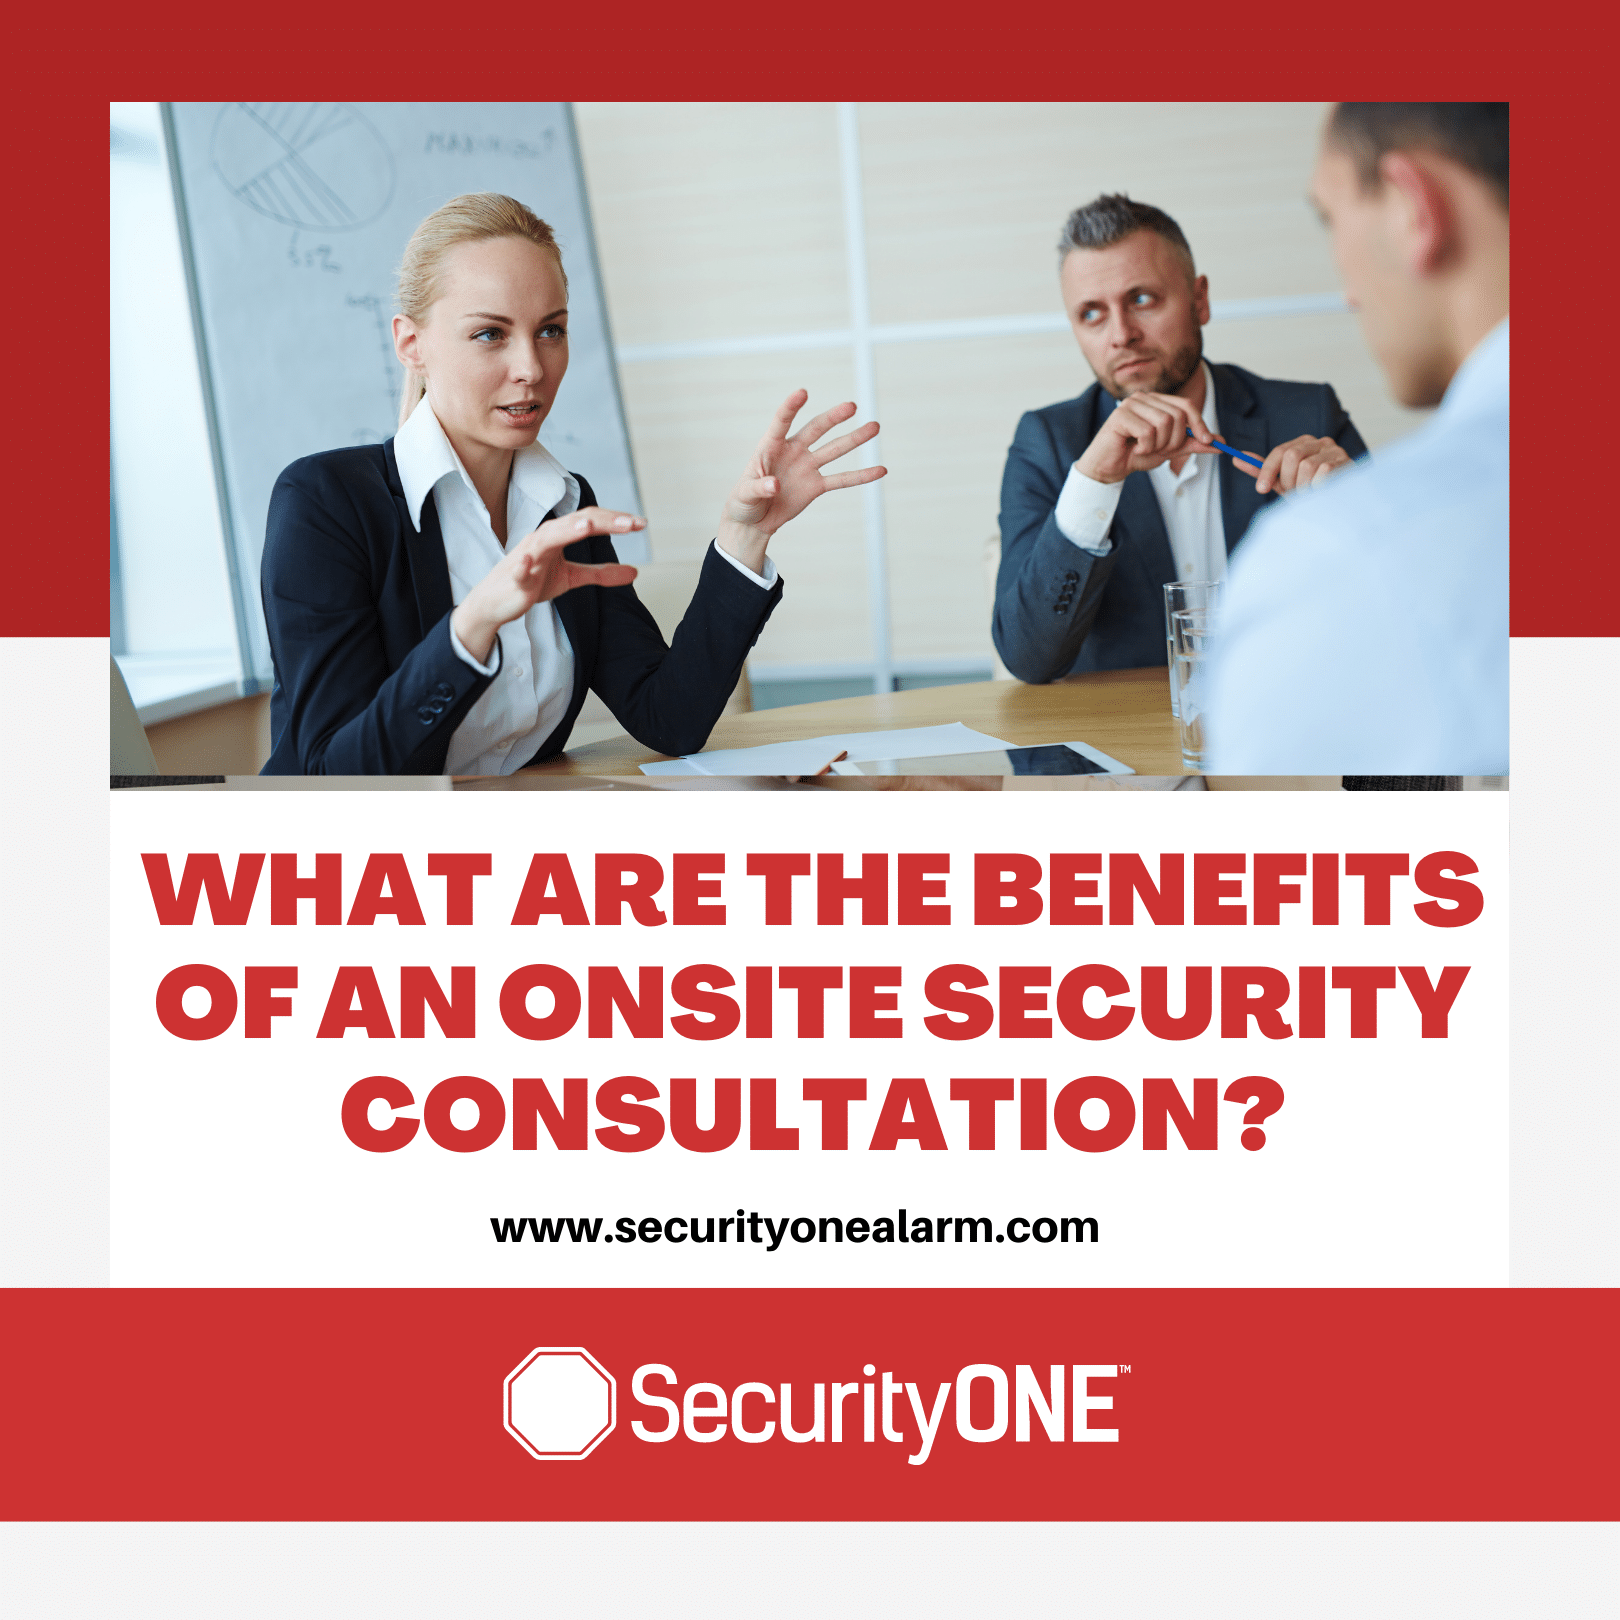 What are the benefits of onsite security consultation